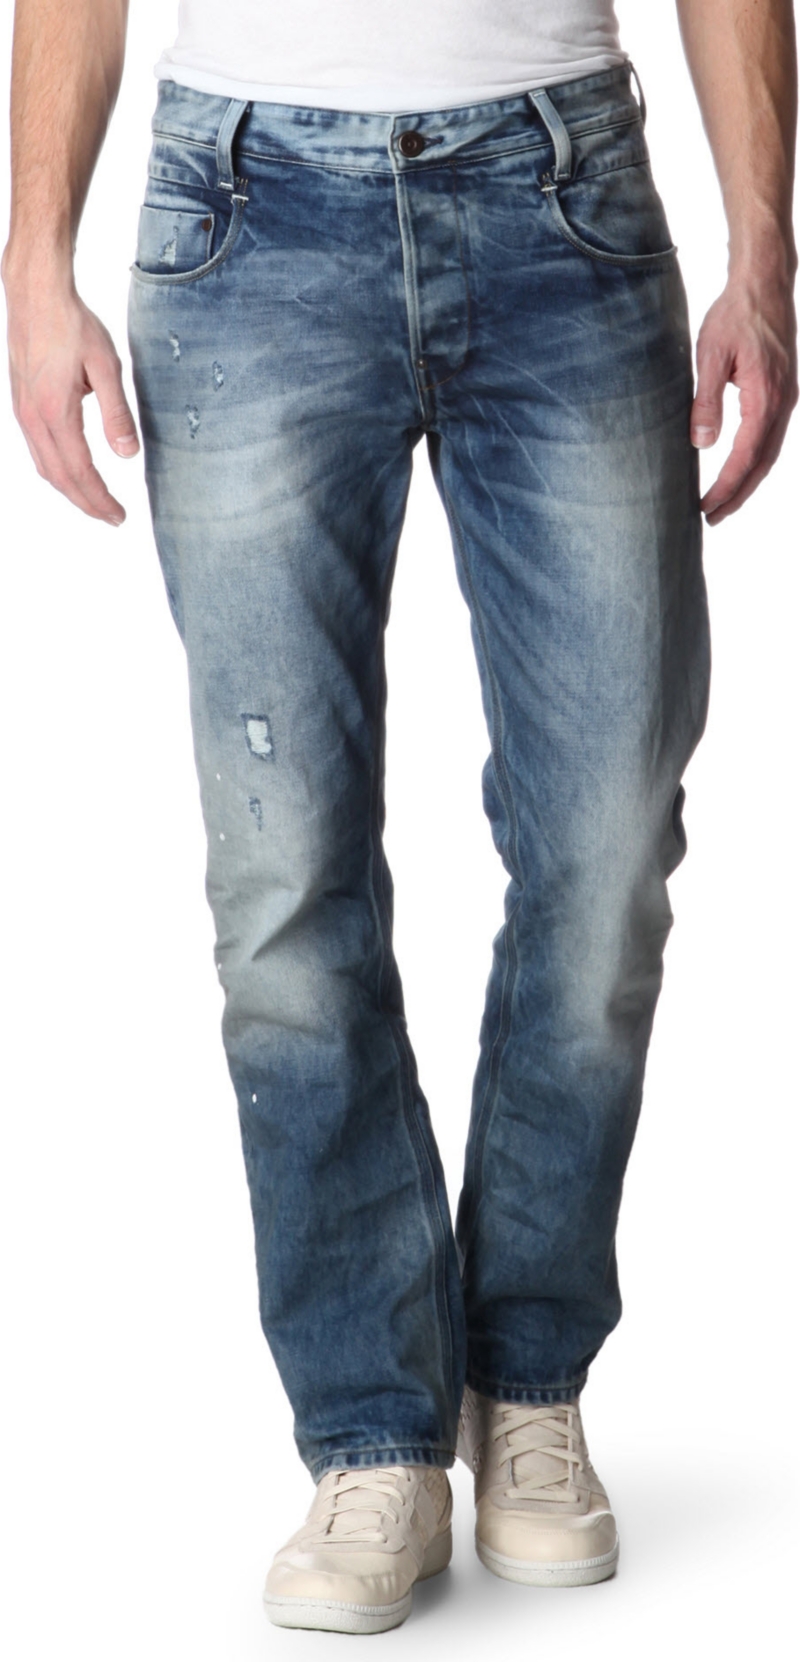 New Radar tapered jeans   G STAR   Tapered   Jeans   Shop Clothing